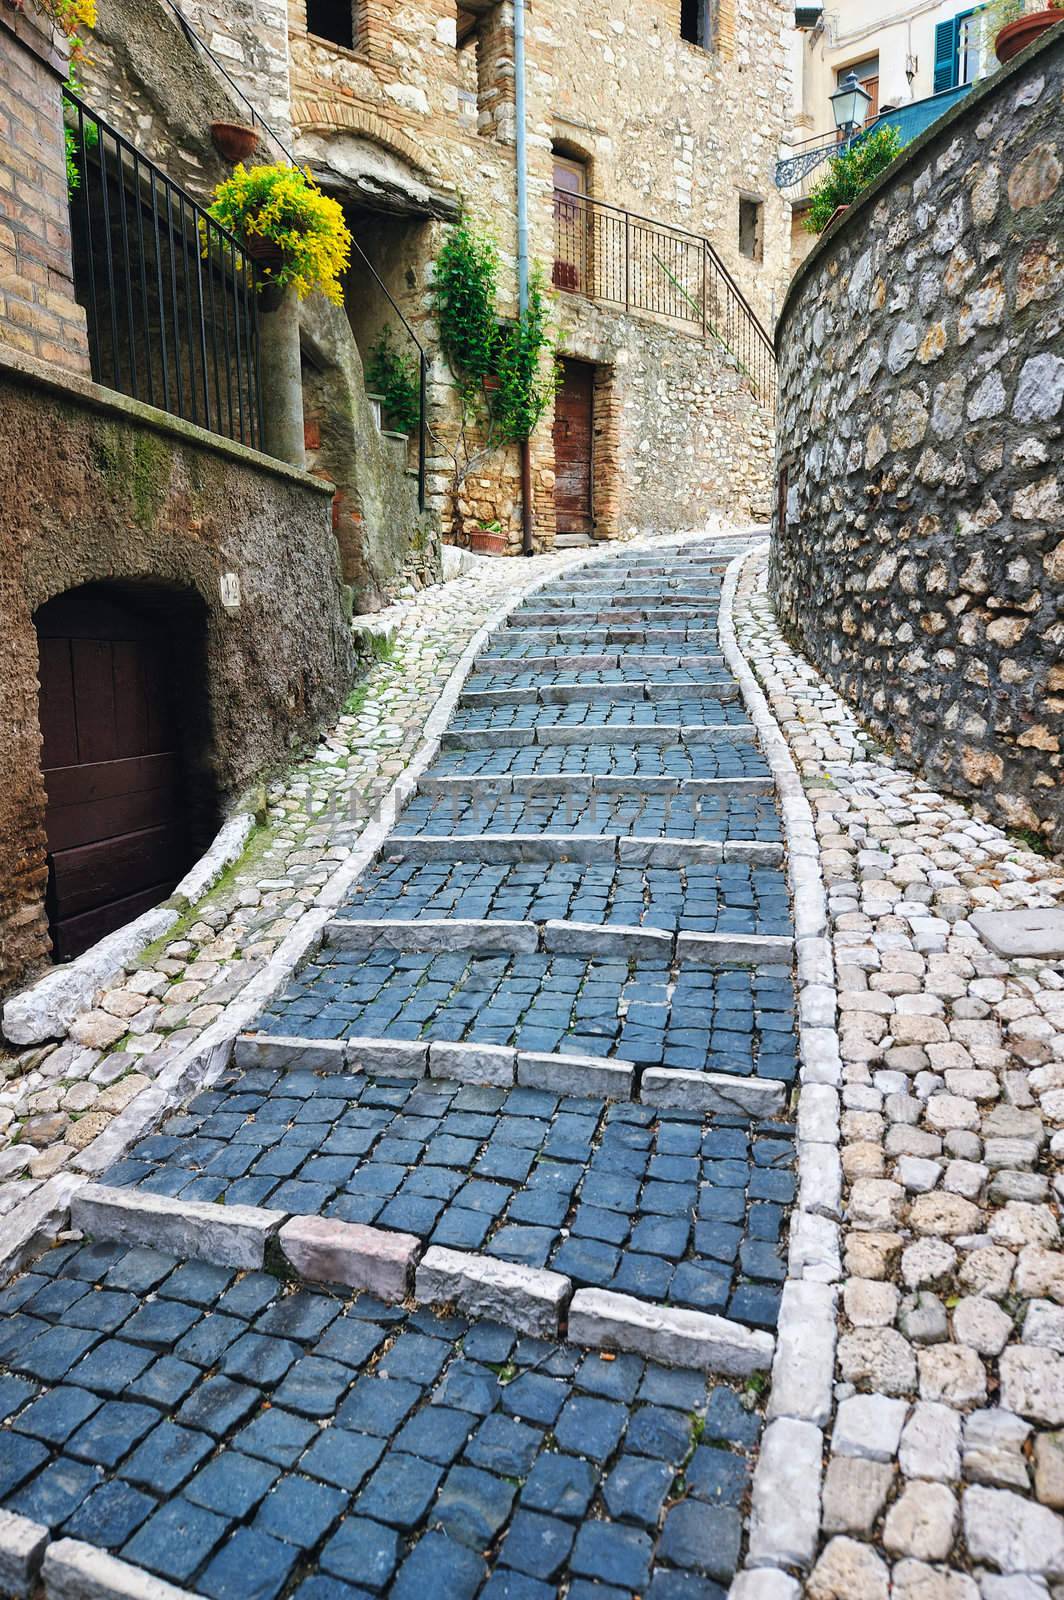 Sidewalk between old homes paved with the cobblestones